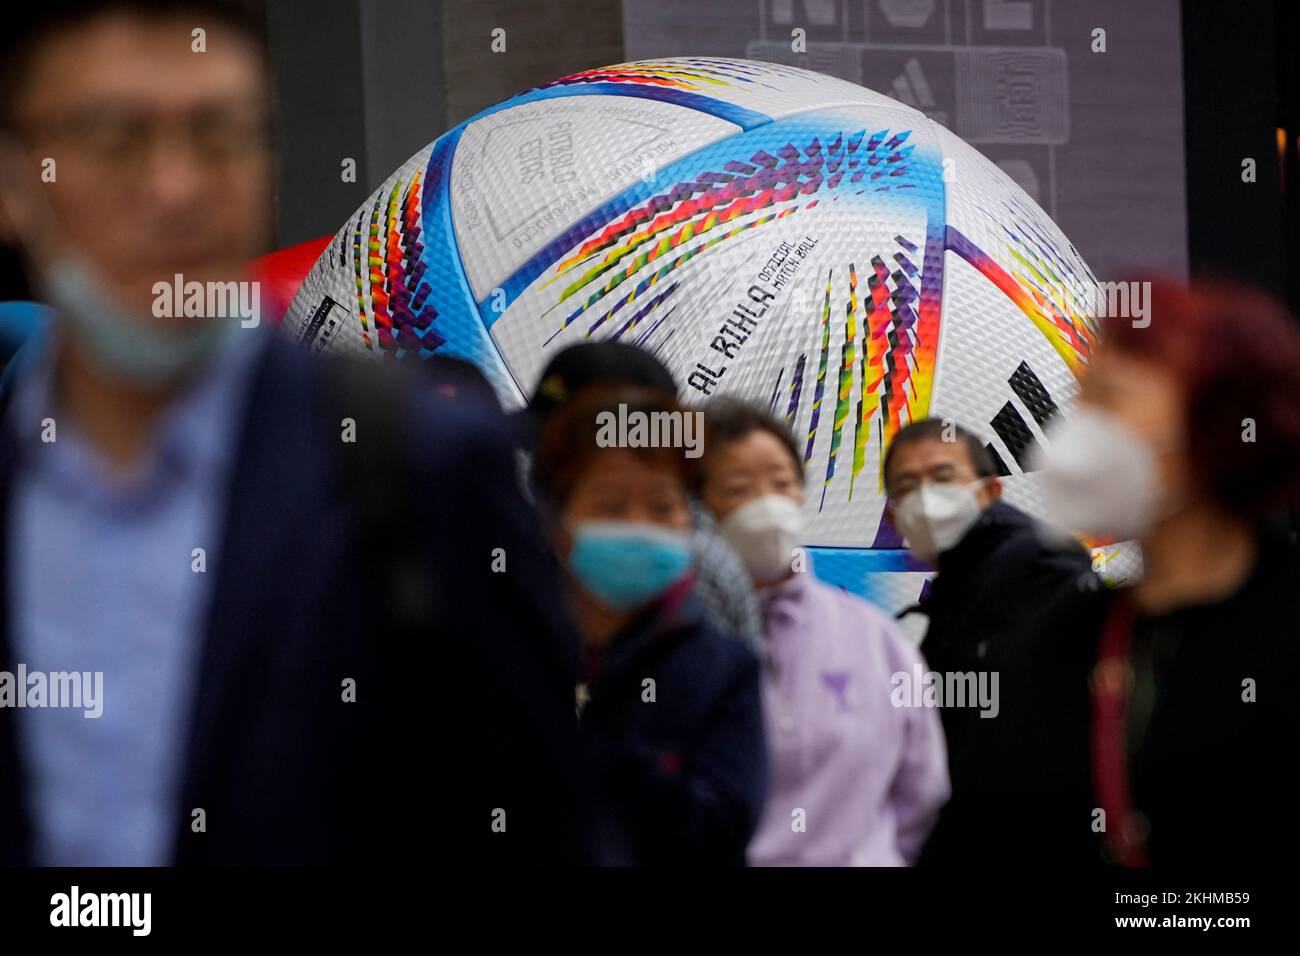 People wearing face masks walk by the giant model of FIFA World Cup Qatar 2022 match ball, amid the coronavirus disease (COVID-19) outbreak in Shanghai, China, November 23, 2022. REUTERS/Aly Song Stock Photo